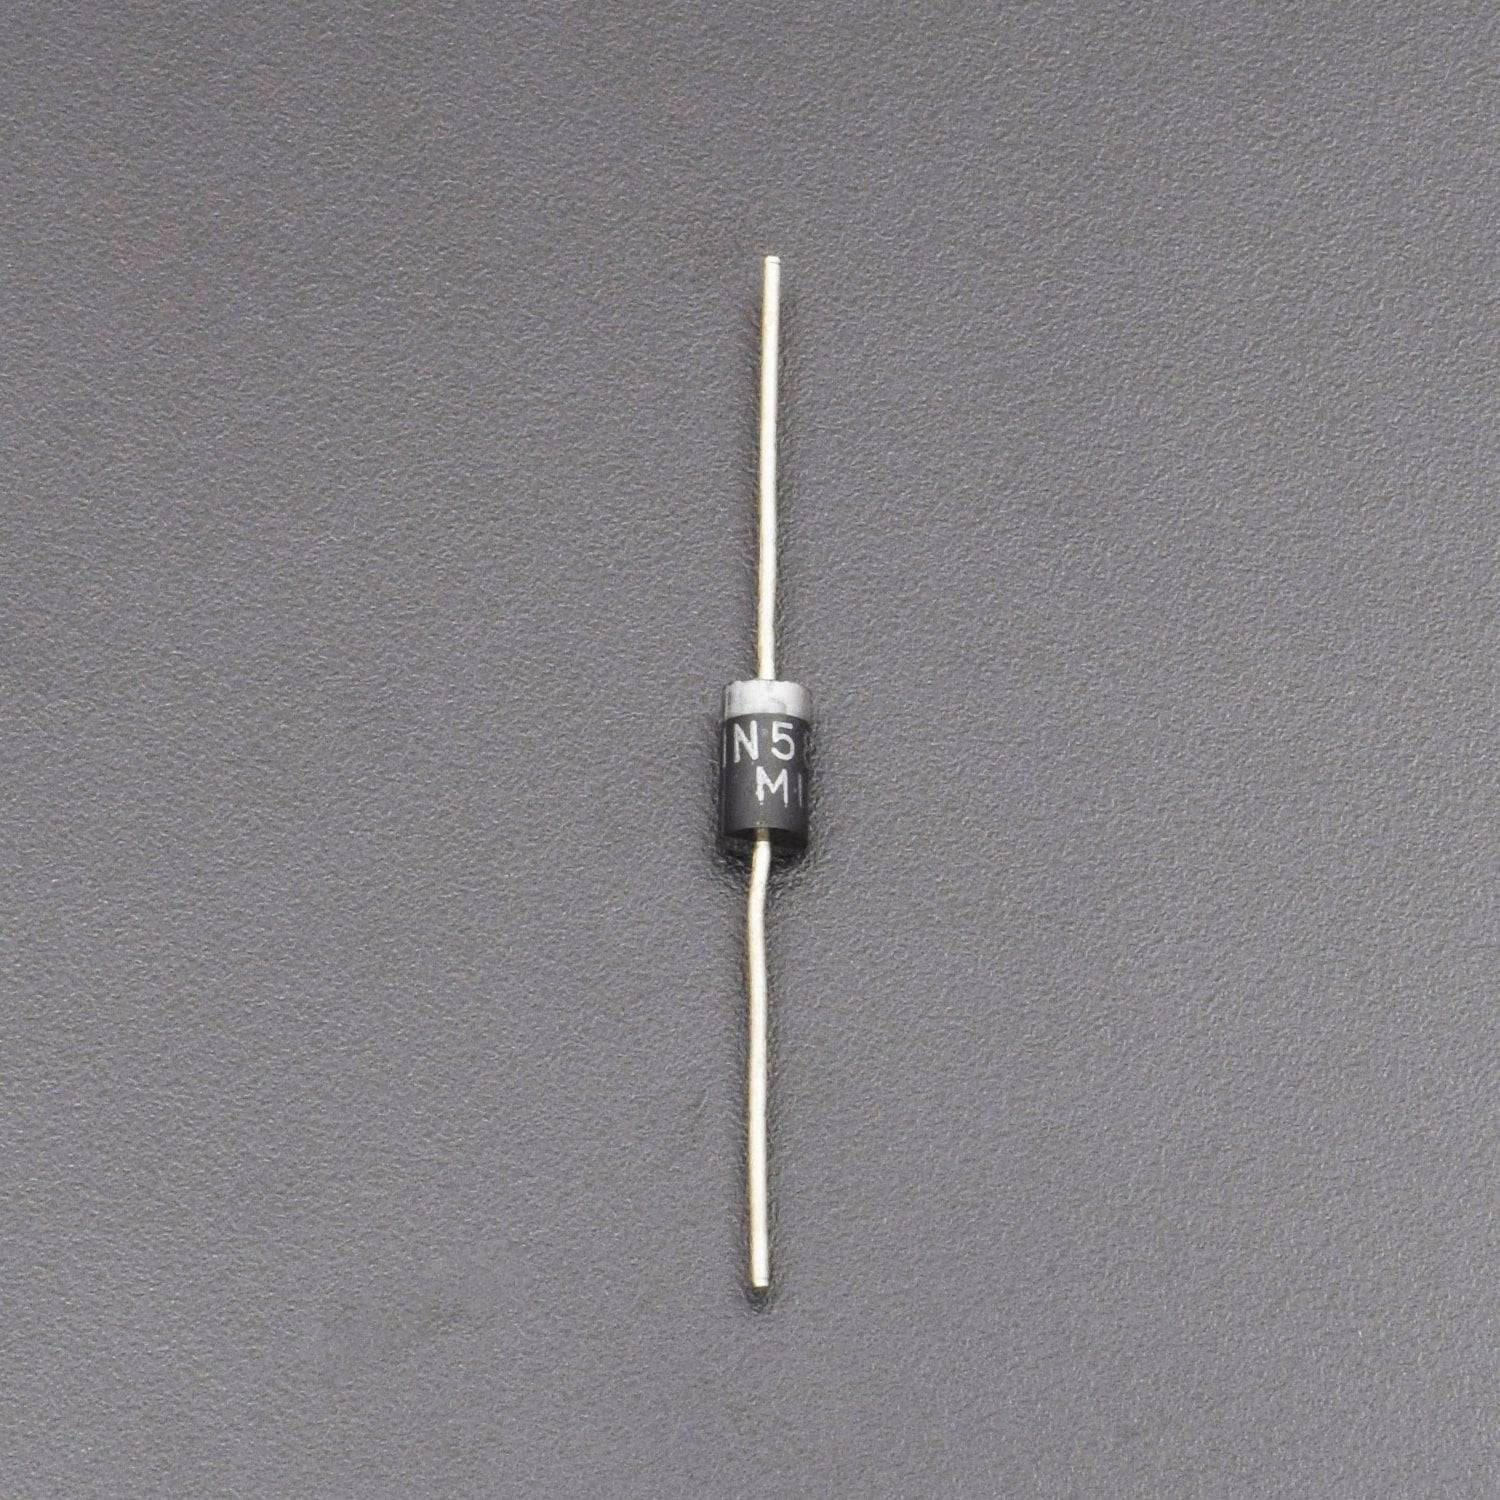 6pcs 1N5822, 3A Schottky Barrier Rectifier Diode DO201AD - RS905 - REES52